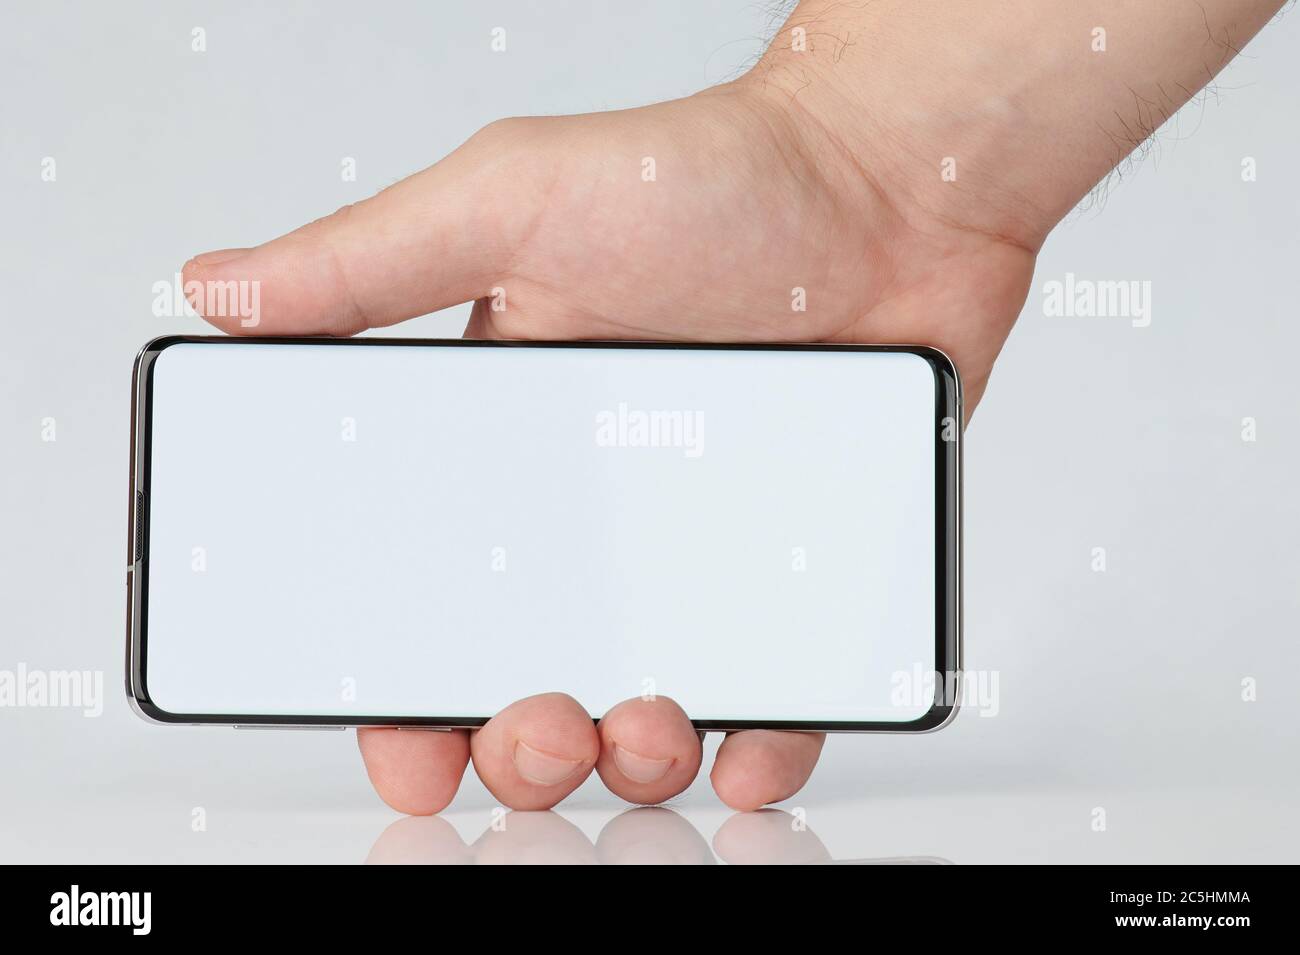 Smartphone with clean display in hand on horizontal orientation isolated Stock Photo